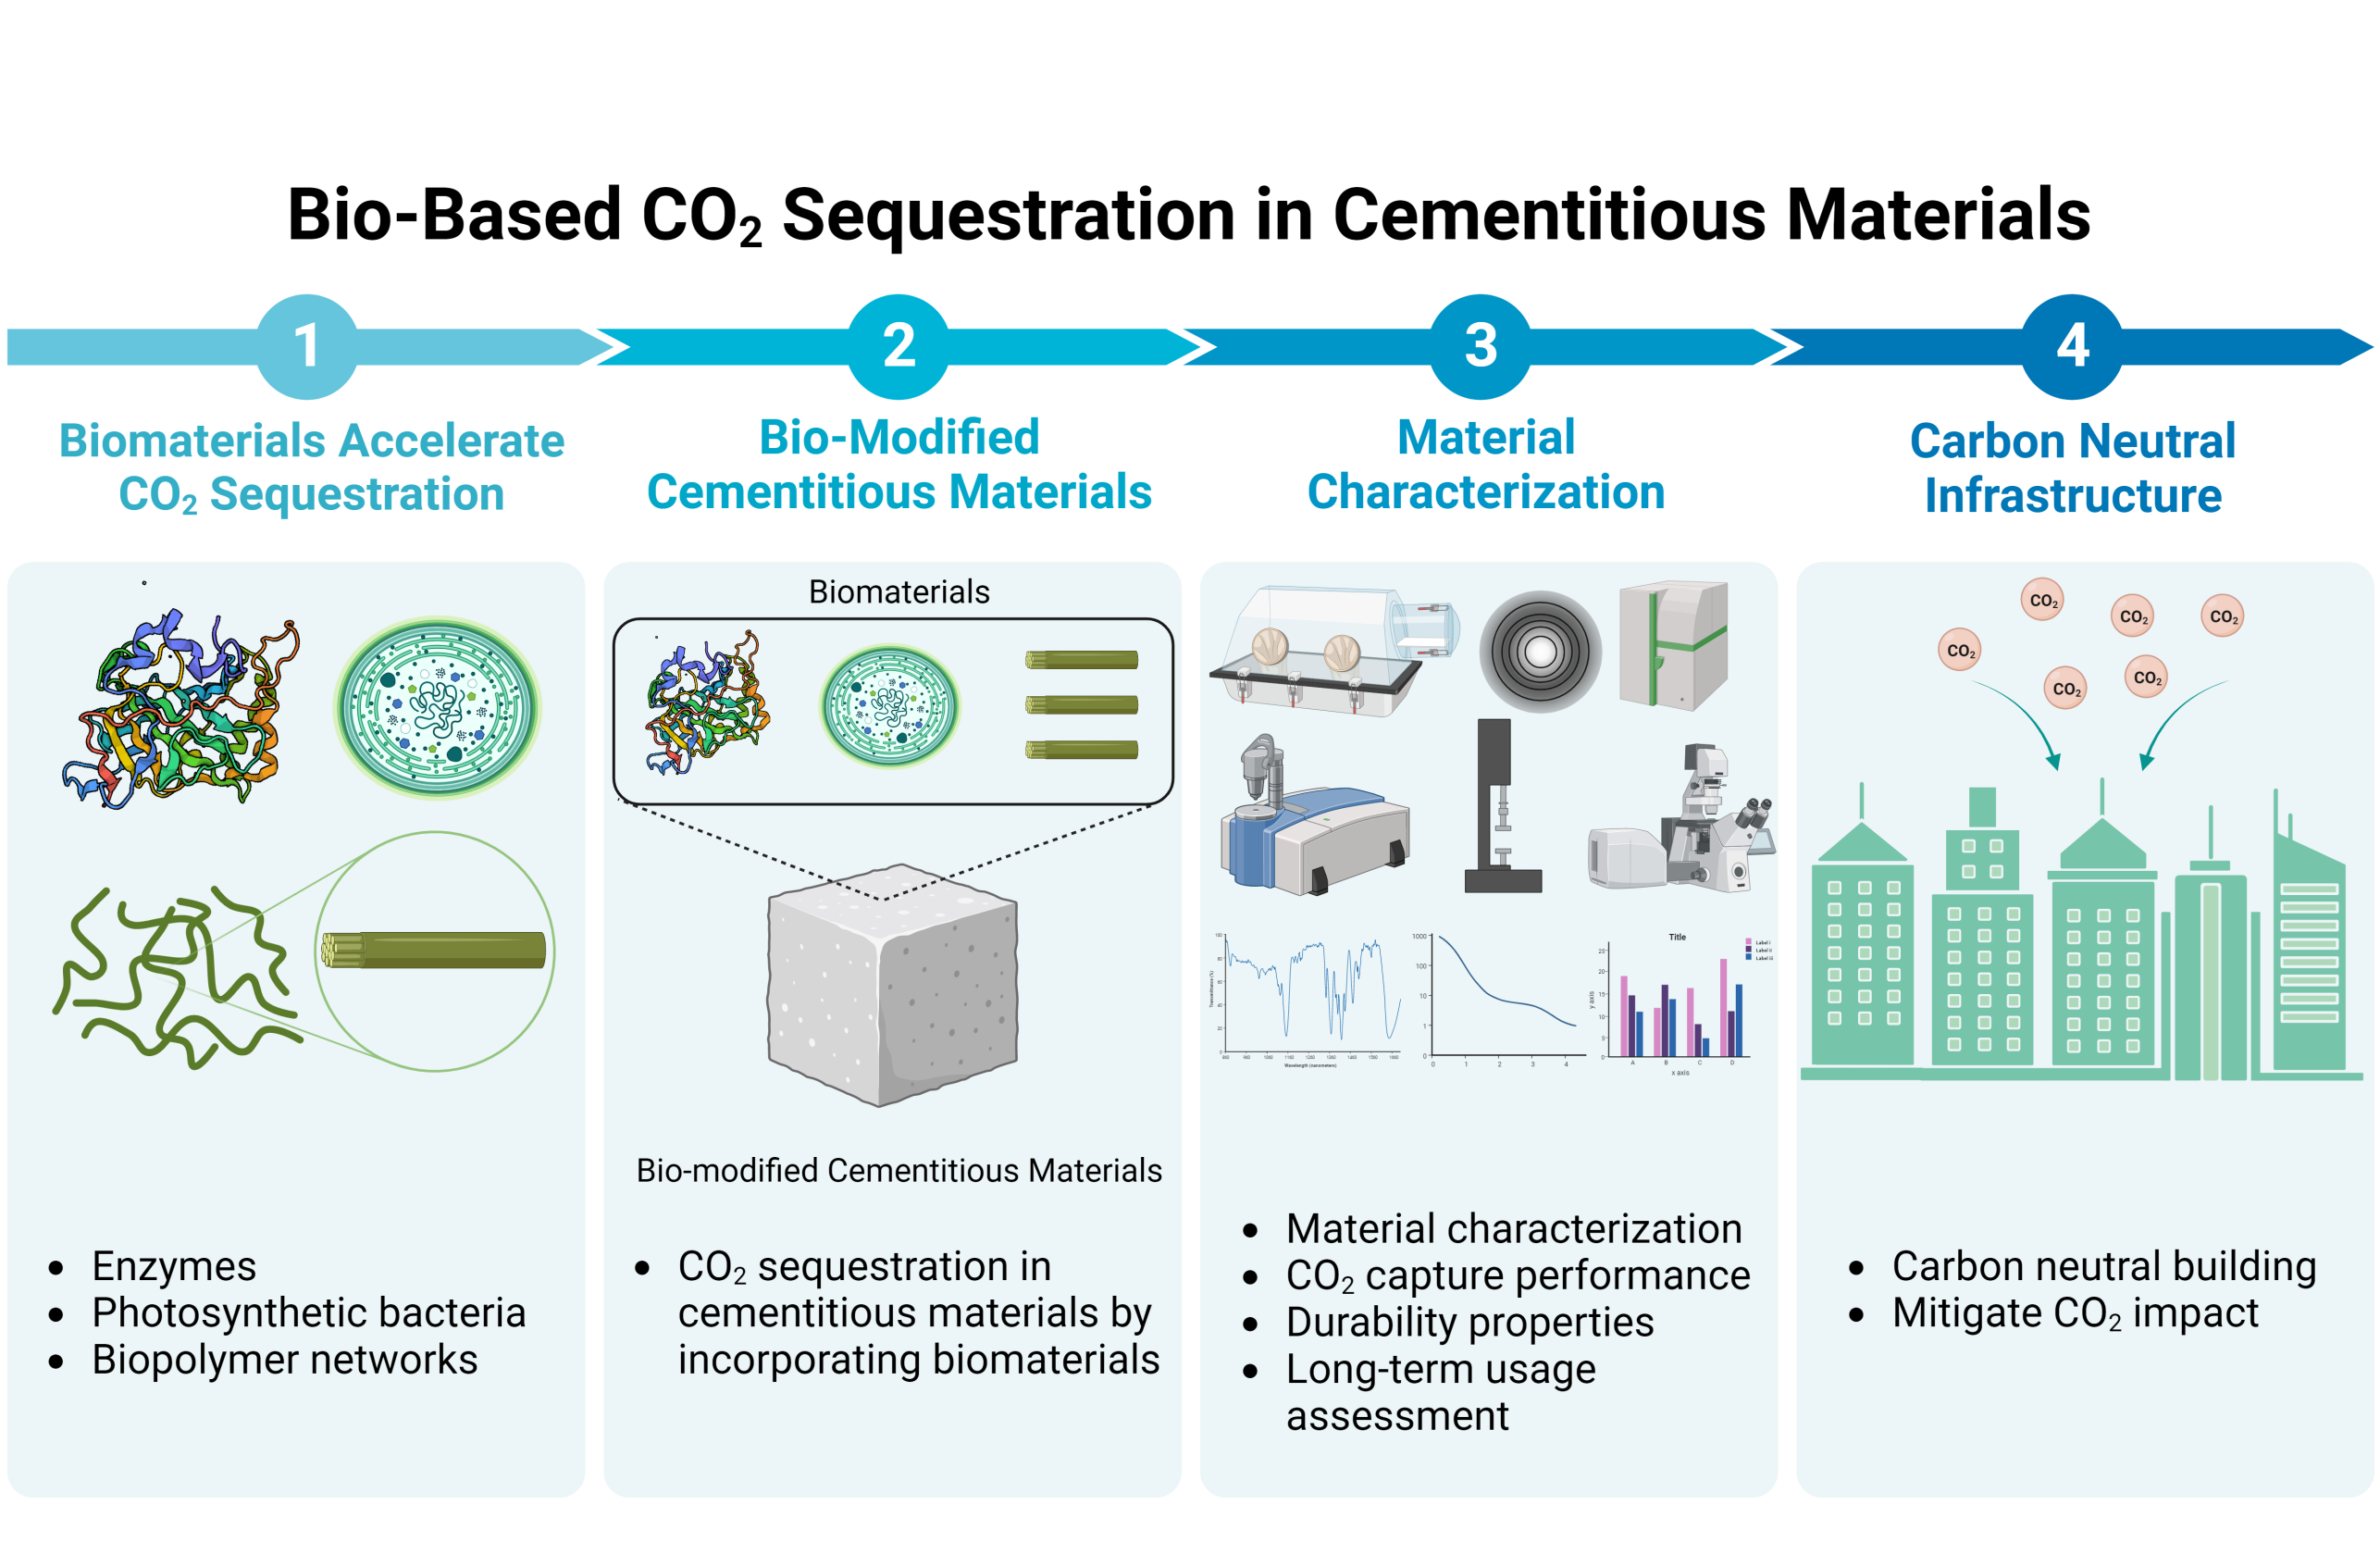 Bio-based CO2 sequestration in cementitious materials 